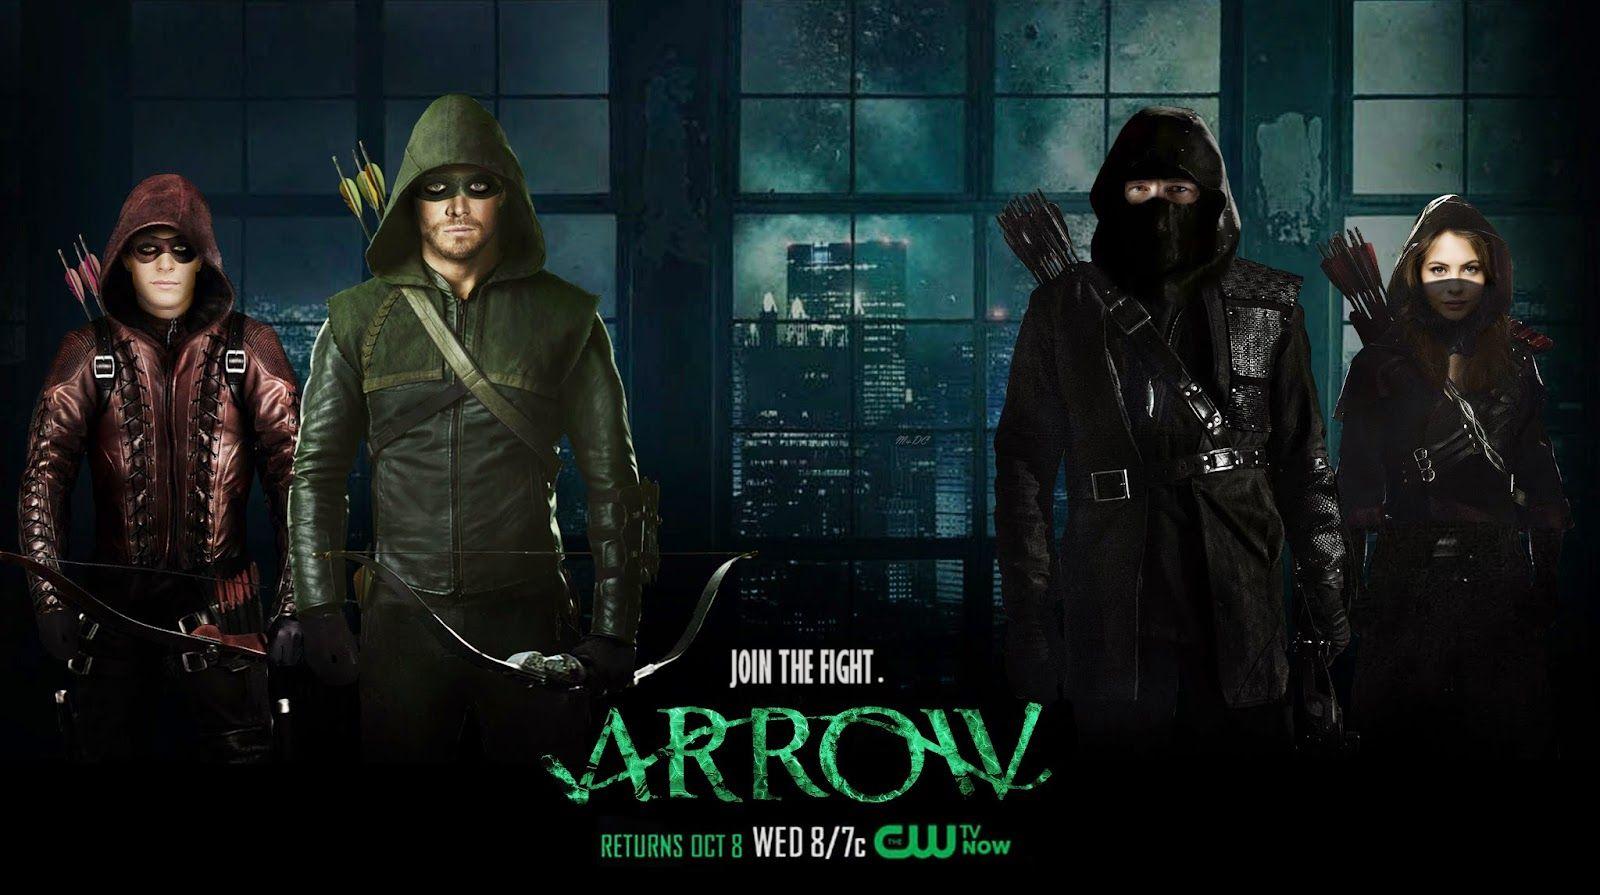 NGN MOVIE & TV ARTICLES: ARROW HITS ITS MARK ONCE AGAIN